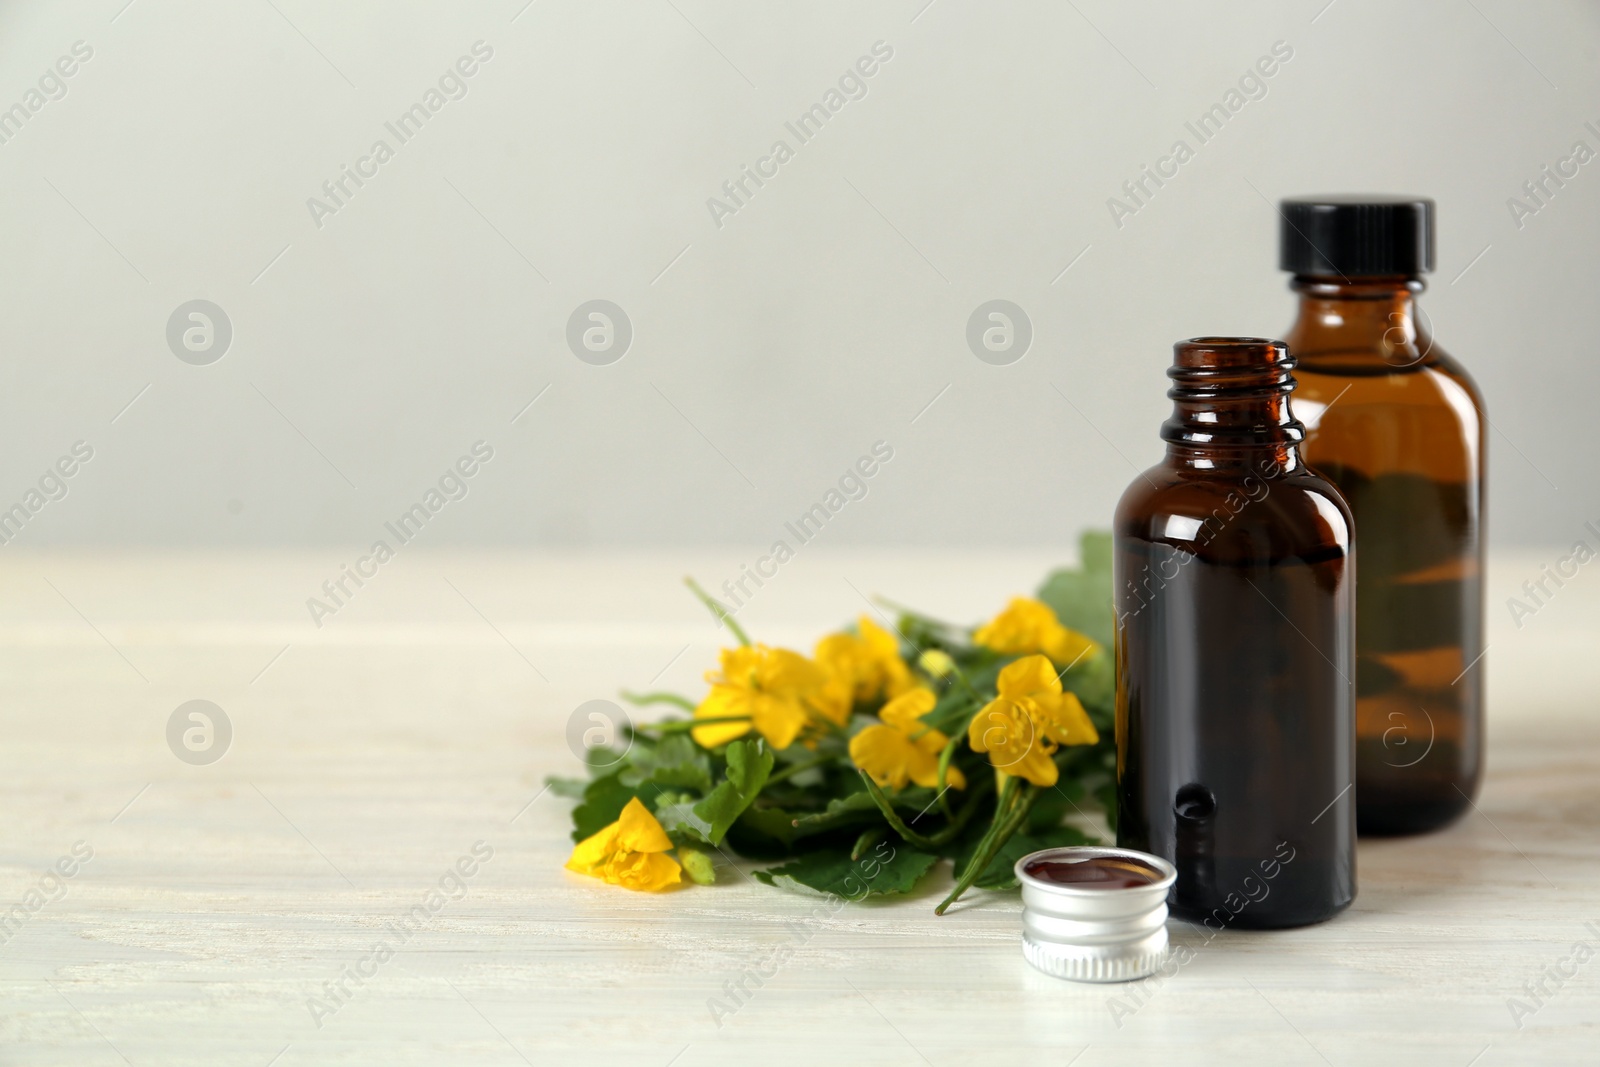 Photo of Bottles of celandine tincture and plant on white wooden table, space for text